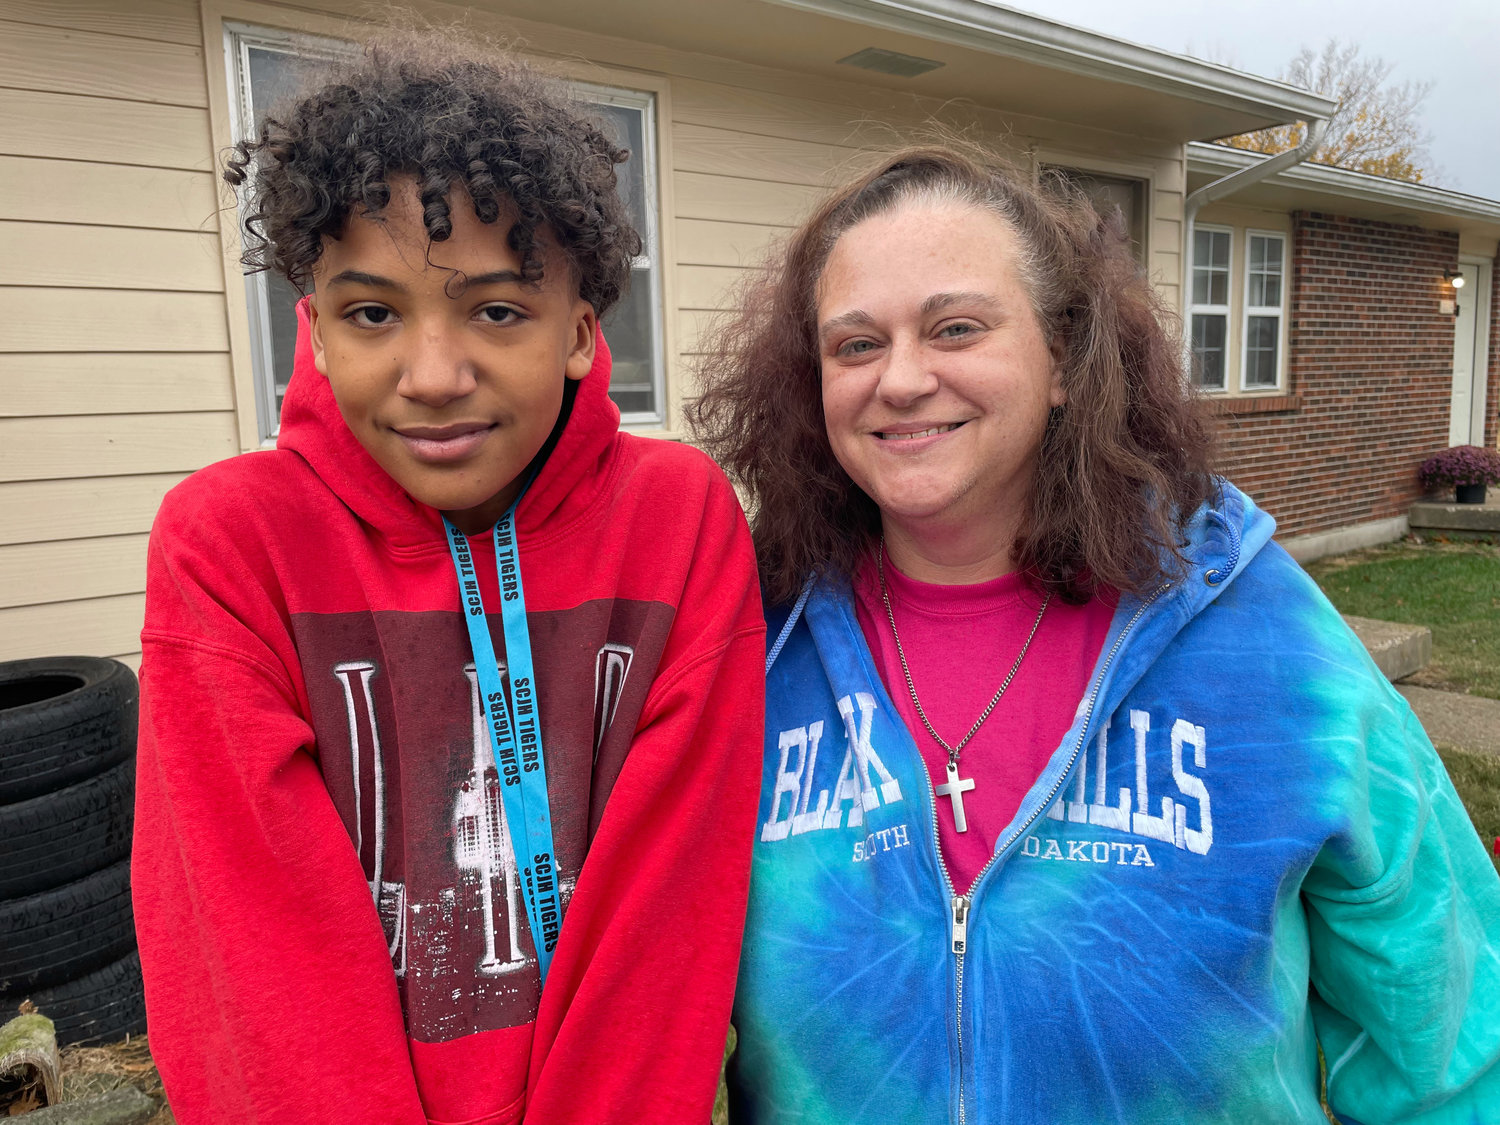 Davion Boggs heard an explosion Saturday morning and saw smoke pouring from his neighbor’s apartment. Patty Boggs, Davion’s grandmother, went and pulled suspected arsonist John Nevels to safety.